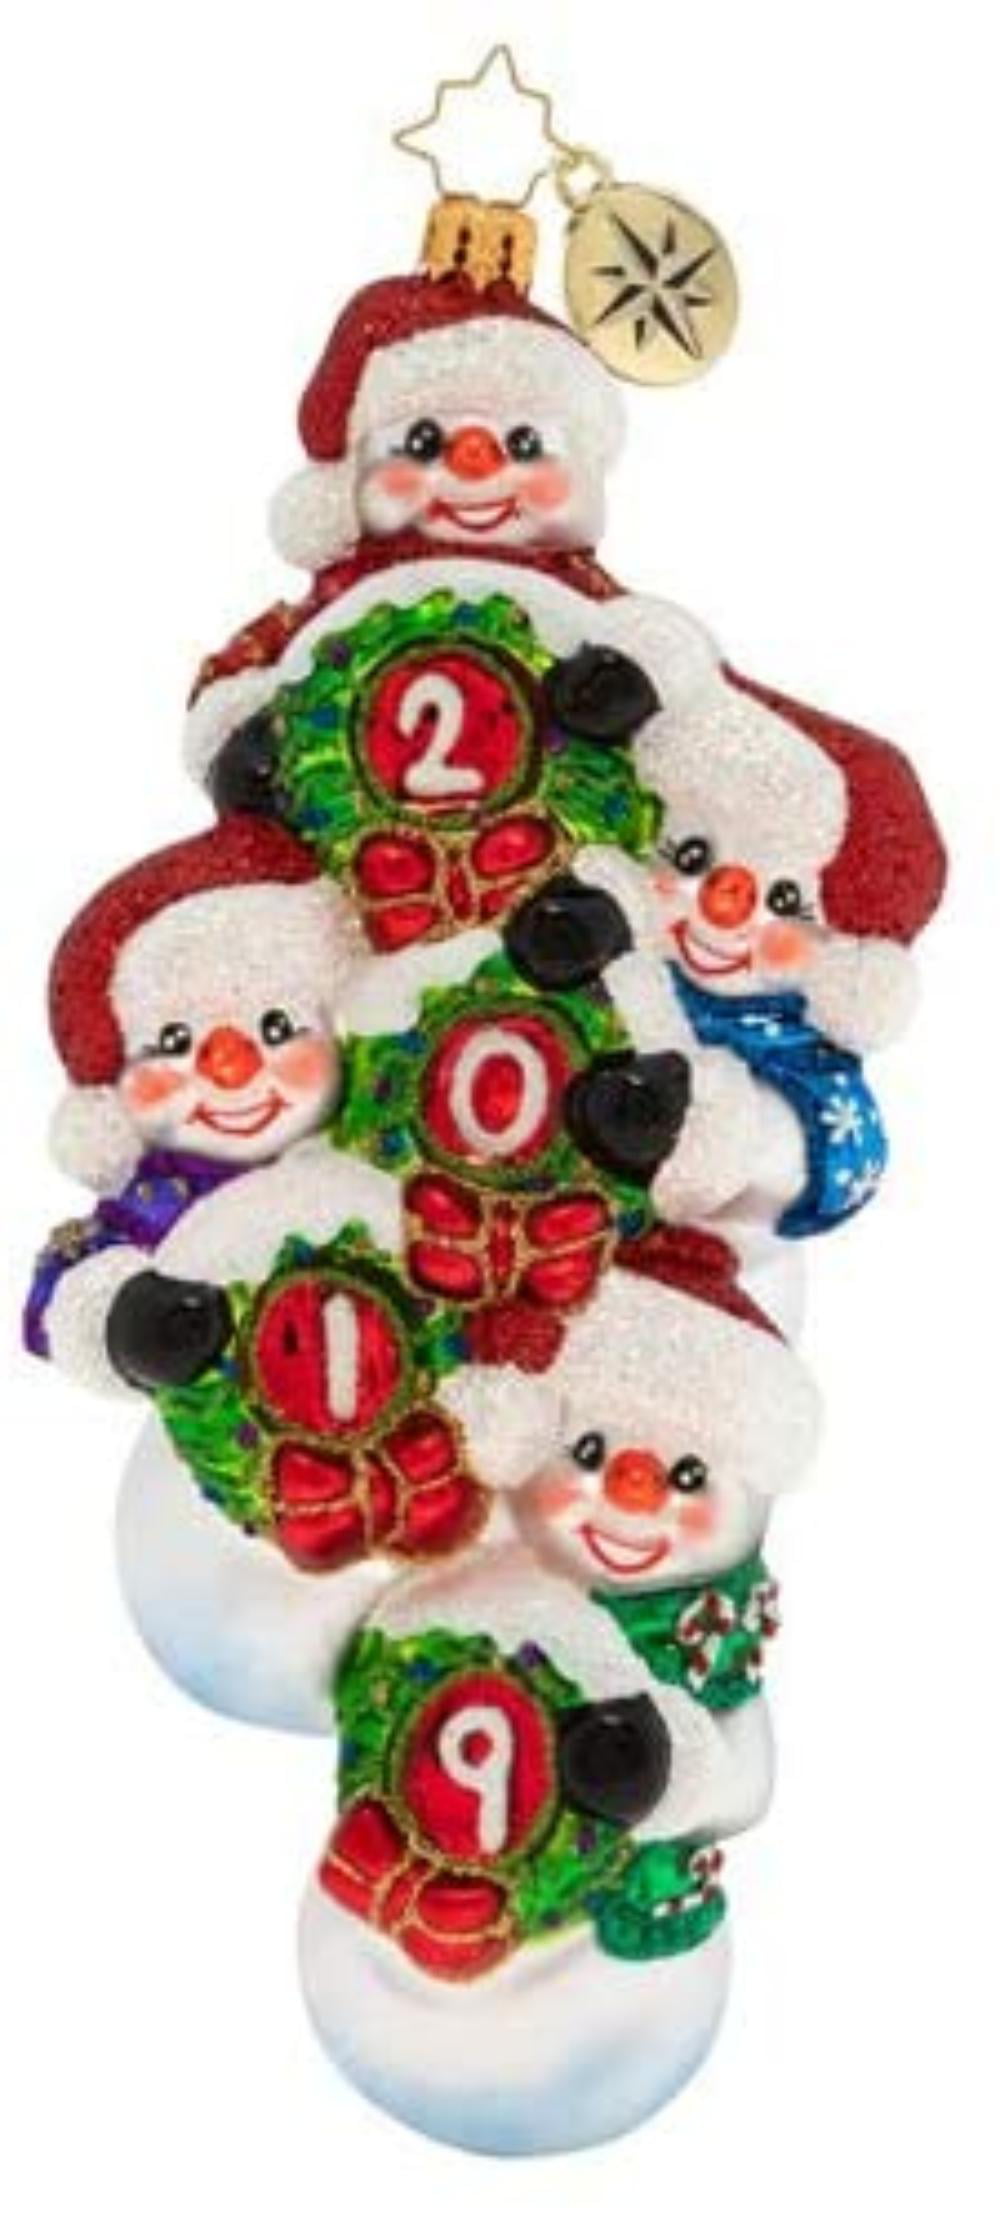 Christopher Radko Hand-Crafted European Glass Christmas Decorative Figural  Ornament, Quadruple The Frosty Fun in 2019!, Our totally frosty friends..,  By Visit the Christopher Radko Store - Walmart.com